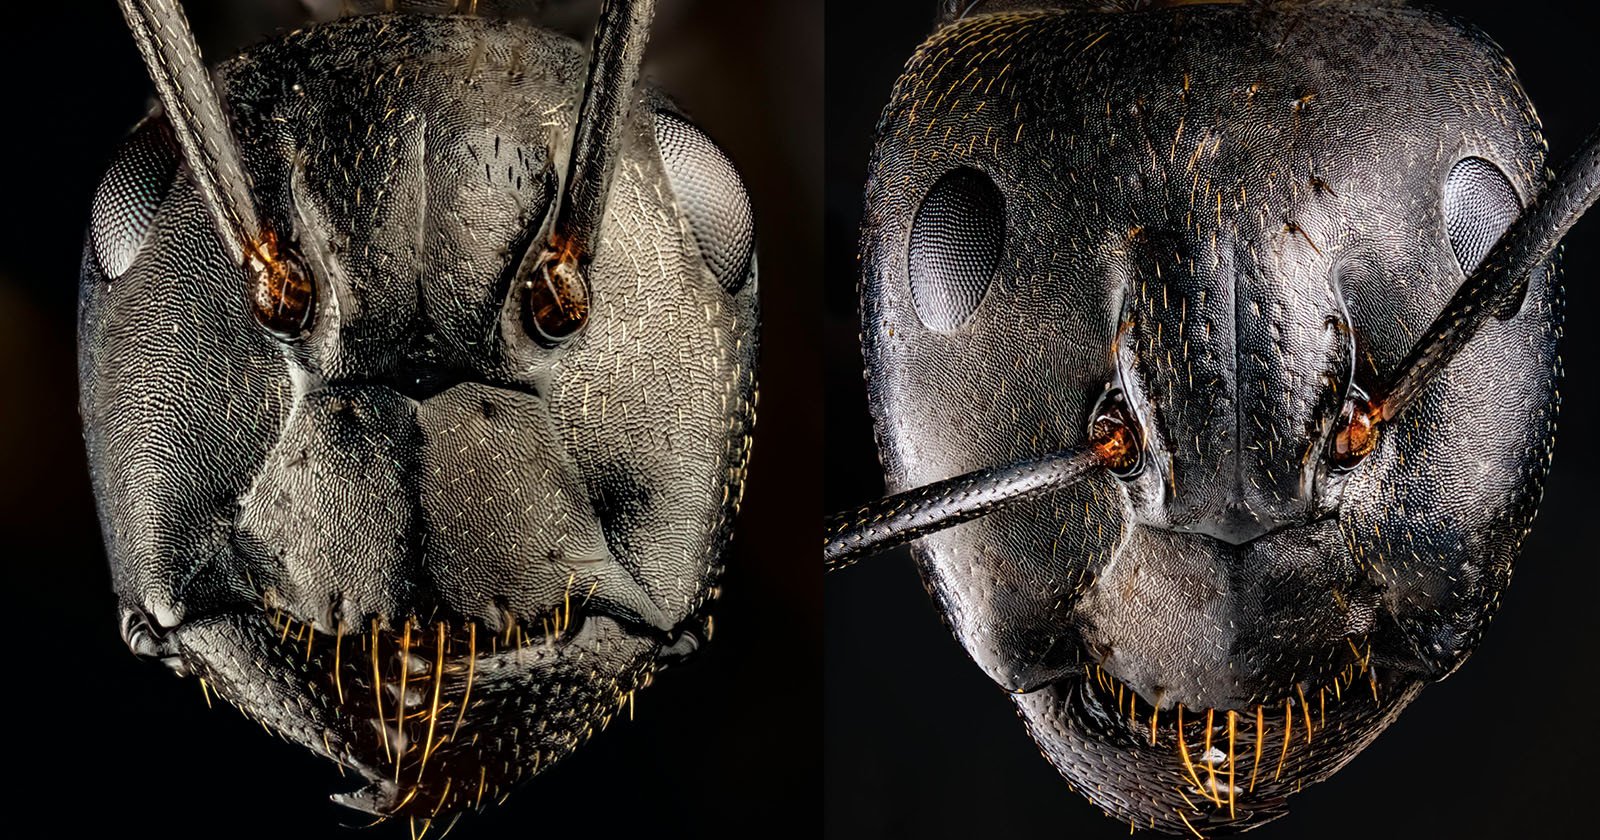  these ultra-detailed photos ants will give nightmares 